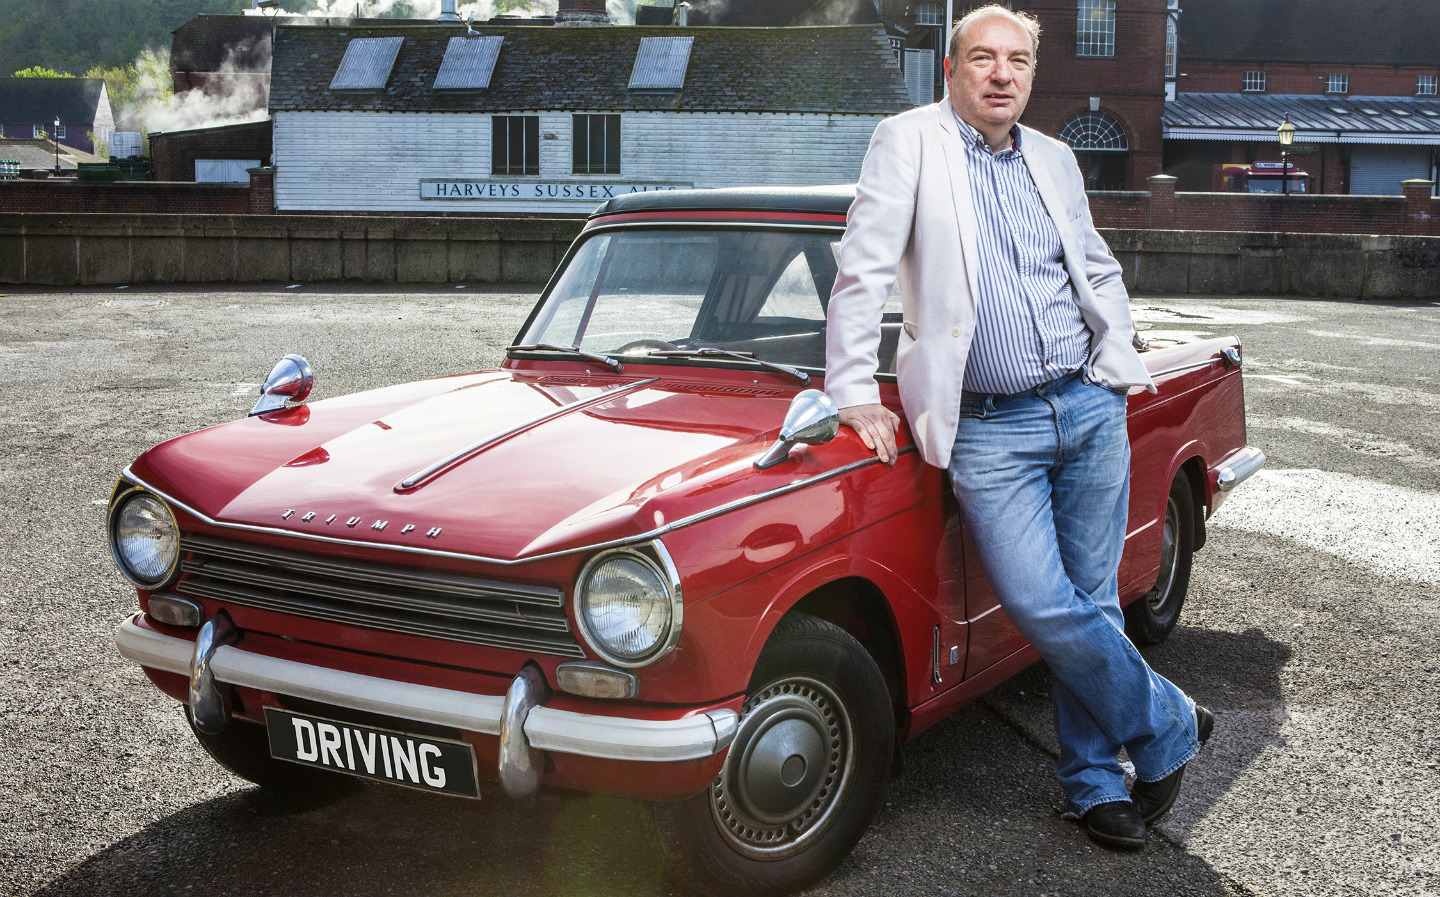 Me and My Motor: Norman Baker, former MP